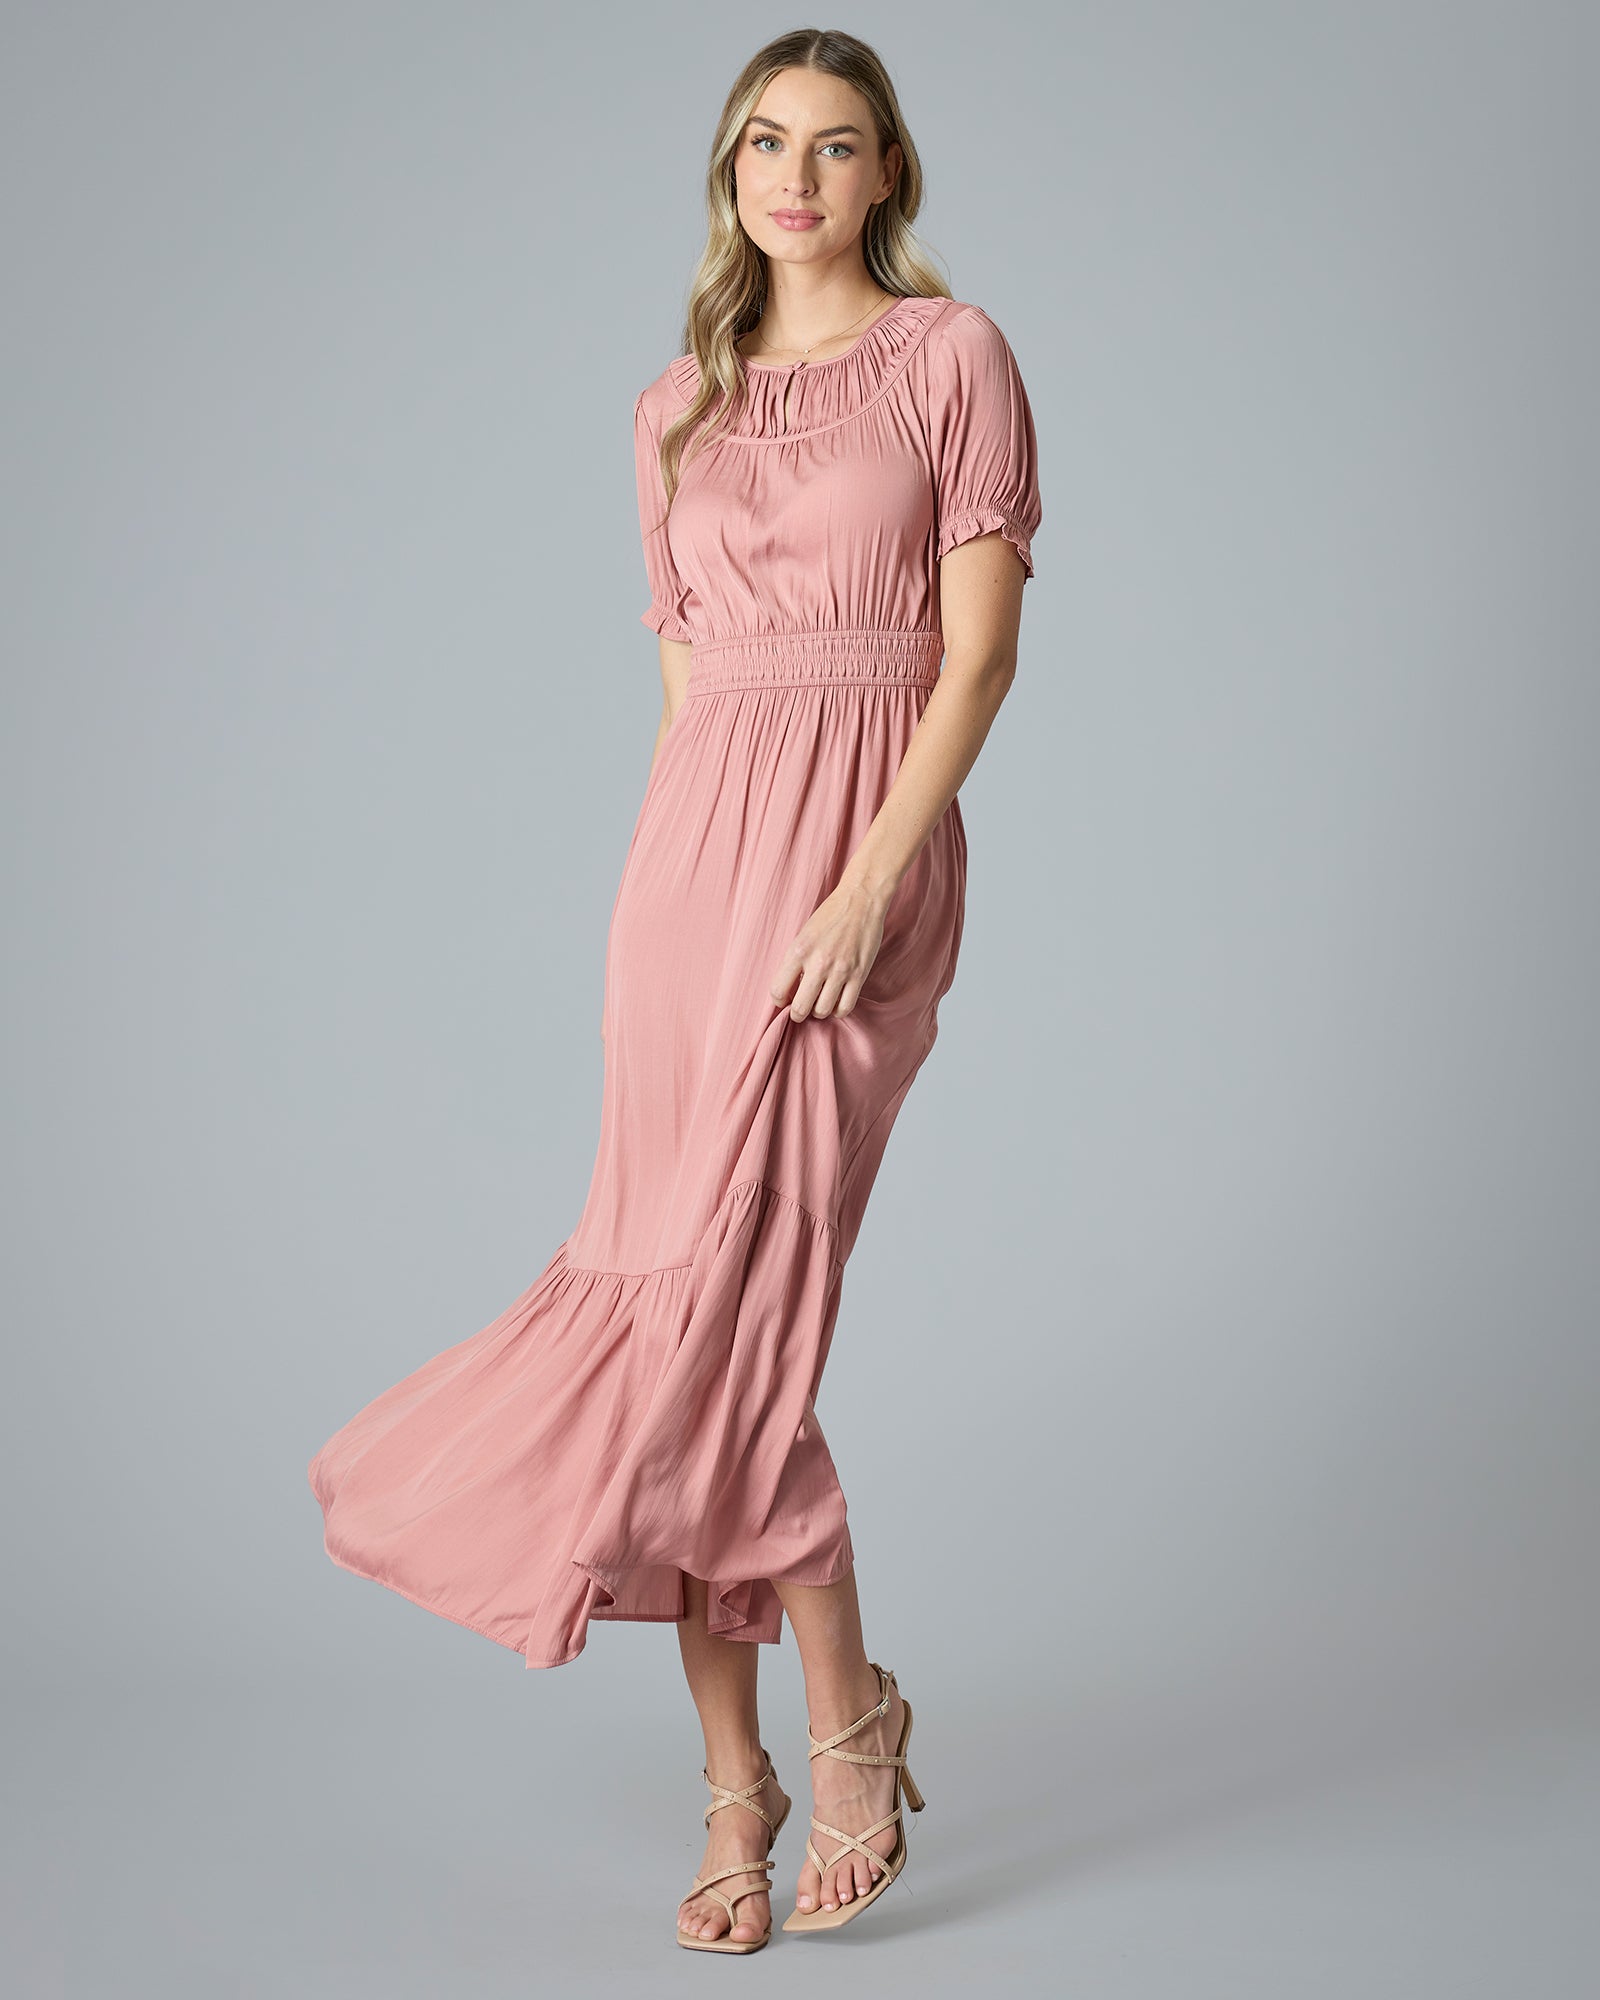 Woman in a pink short sleeve maxi dress